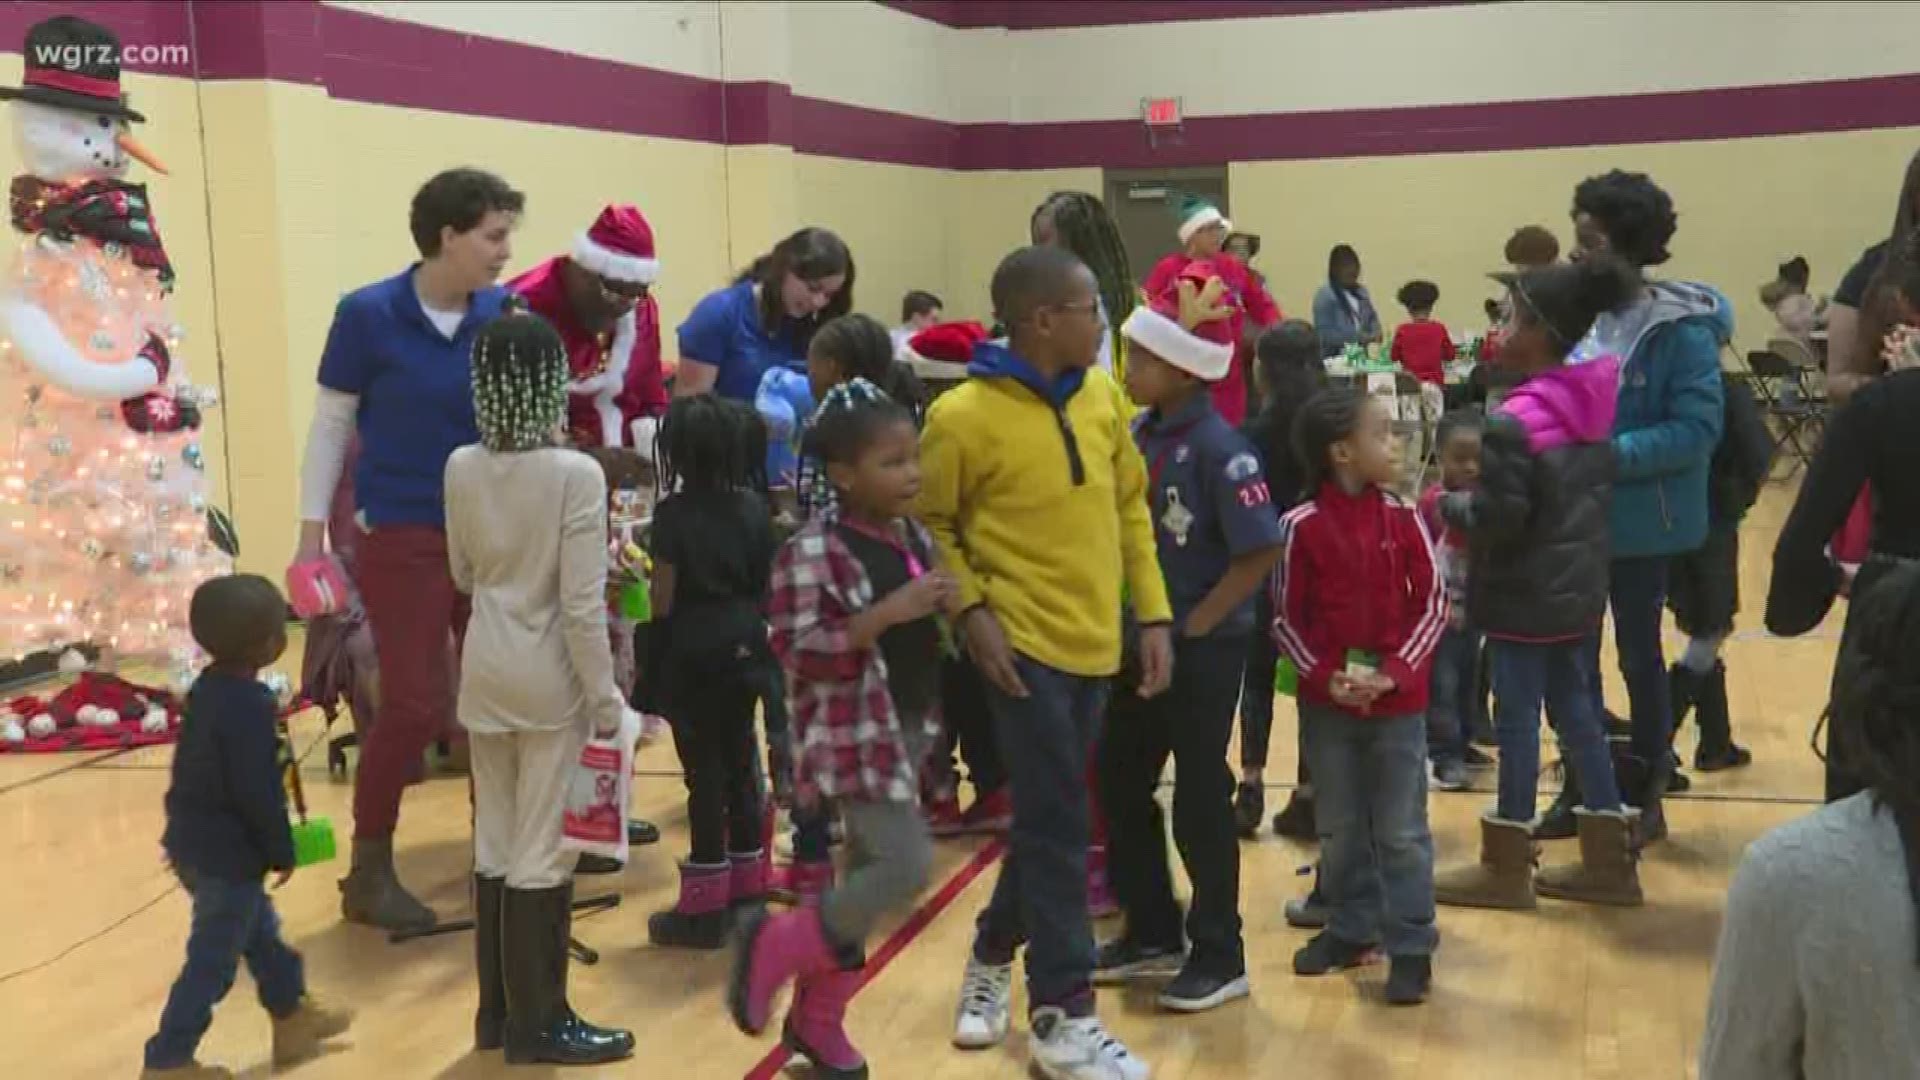 The event was held at the Pratt Willard Community Center. There were a number of activities for the family like a petting zoo, bell ringers and time with Santa!